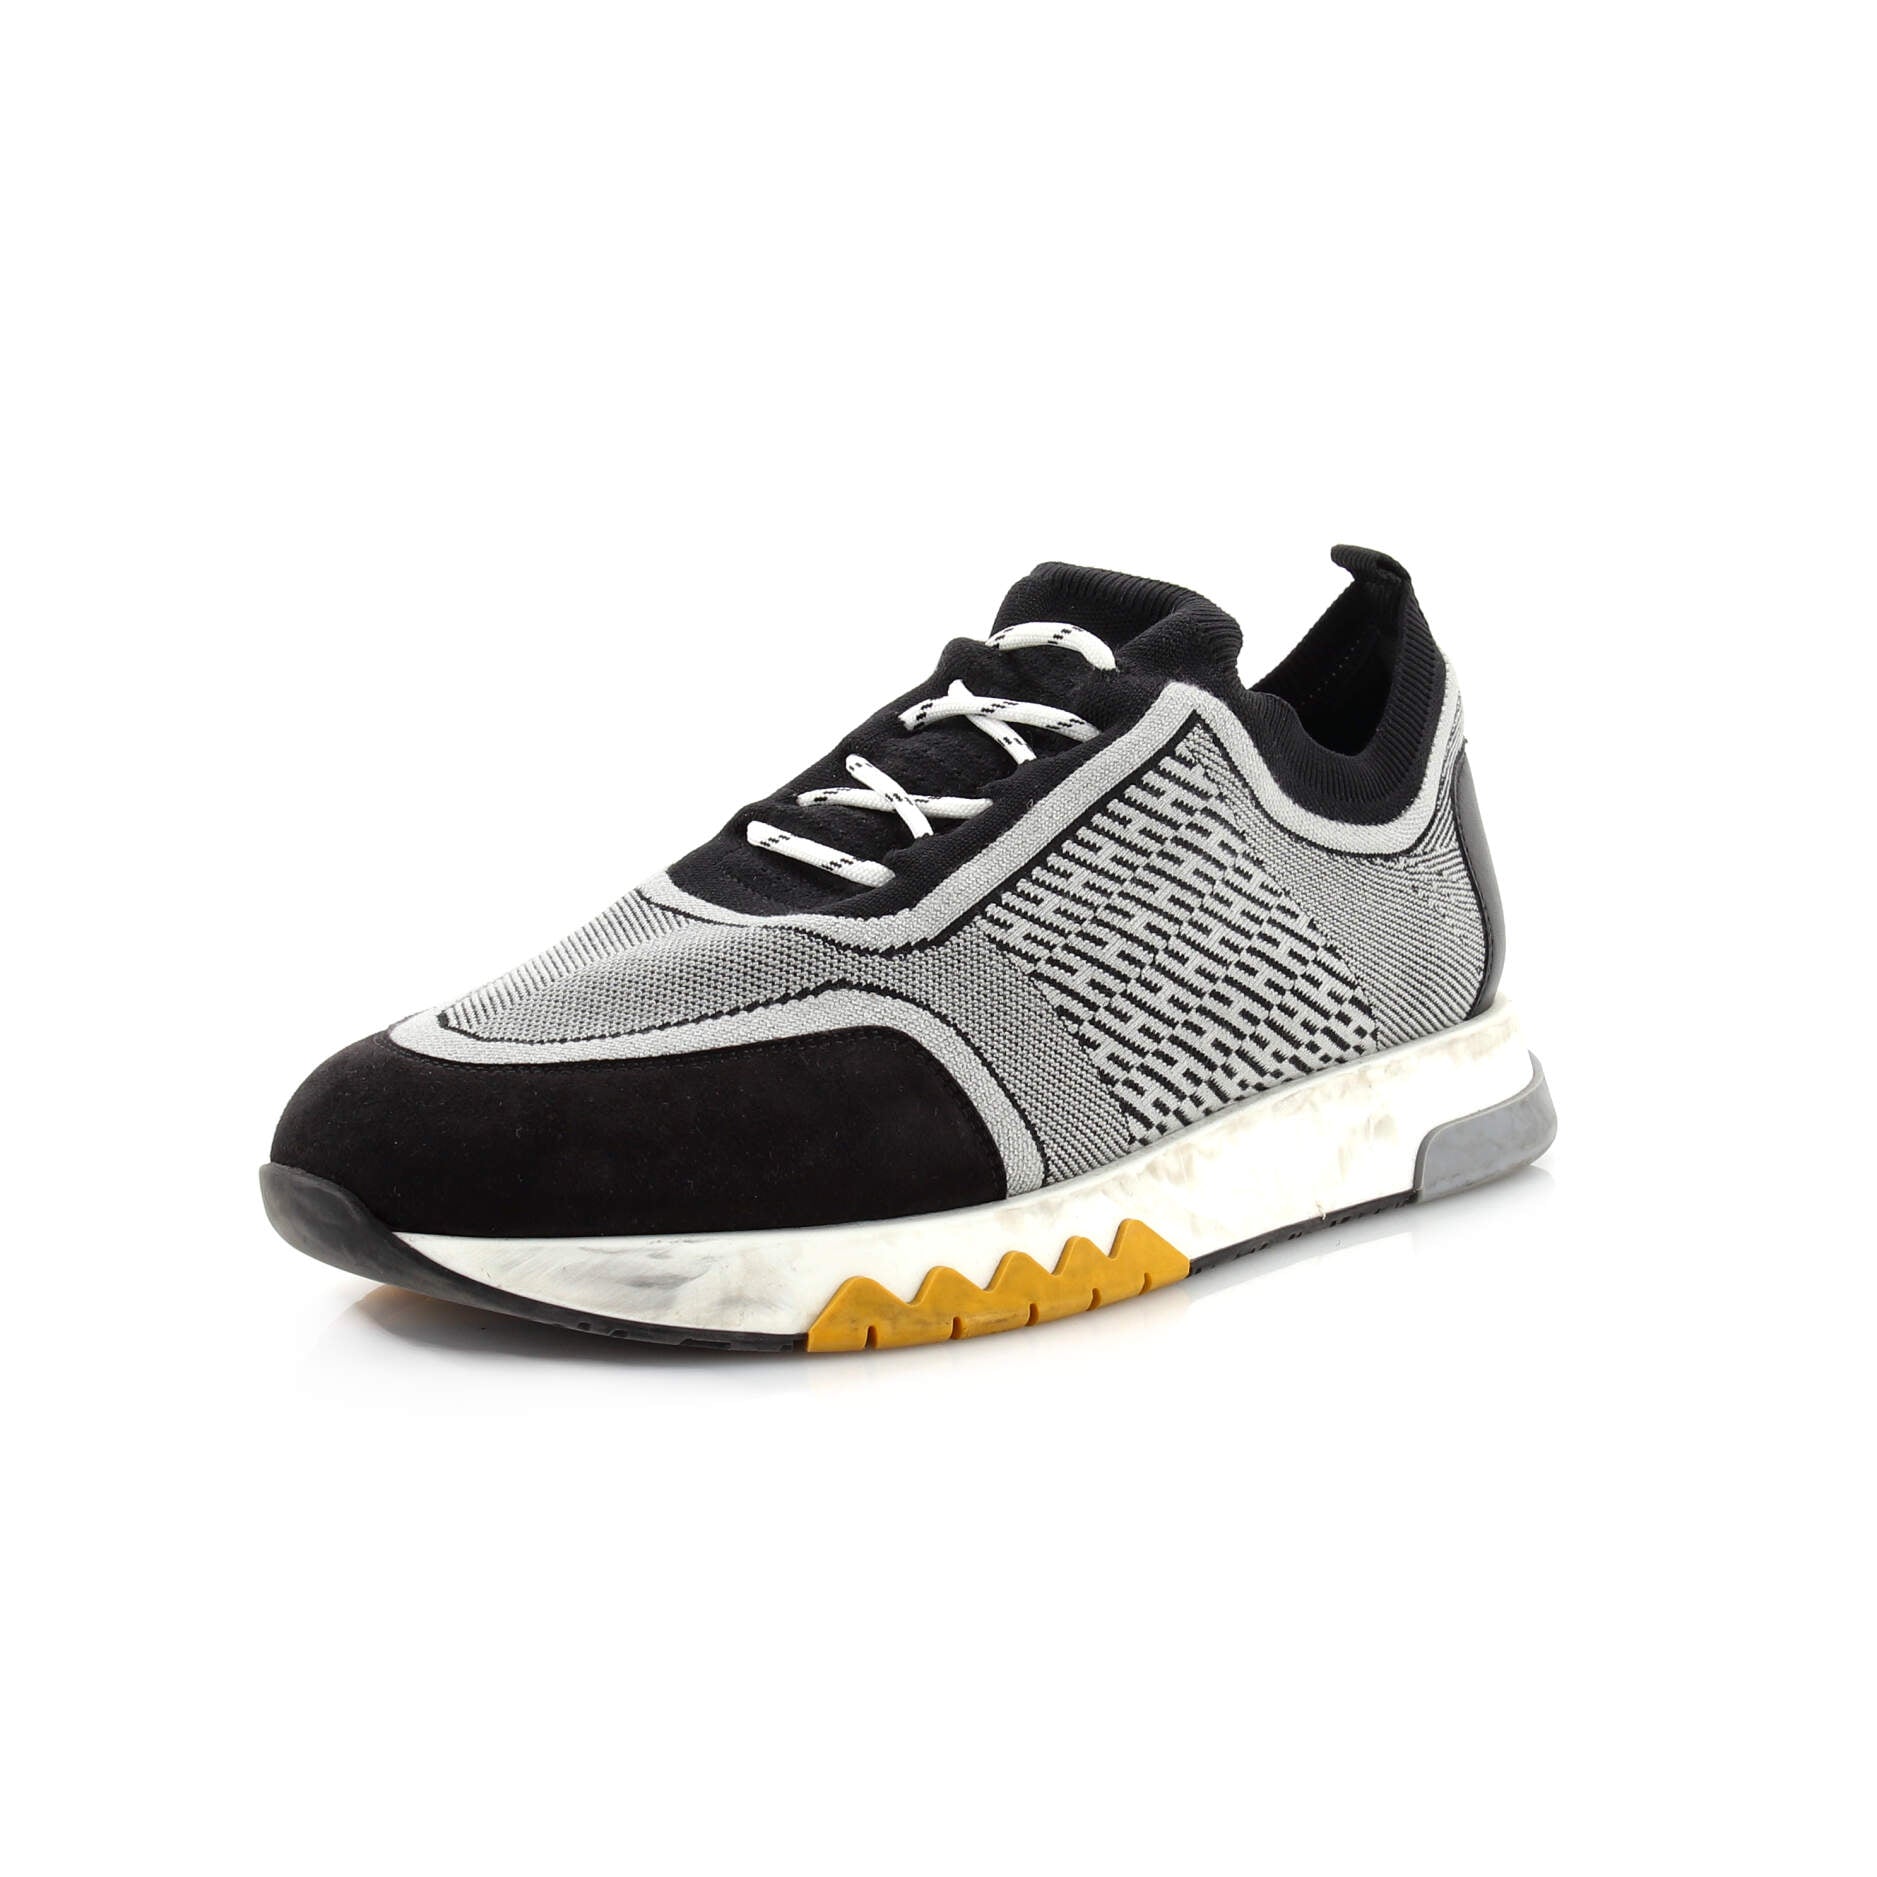 Men's Addict Sneakers Knit Fabric with Leather